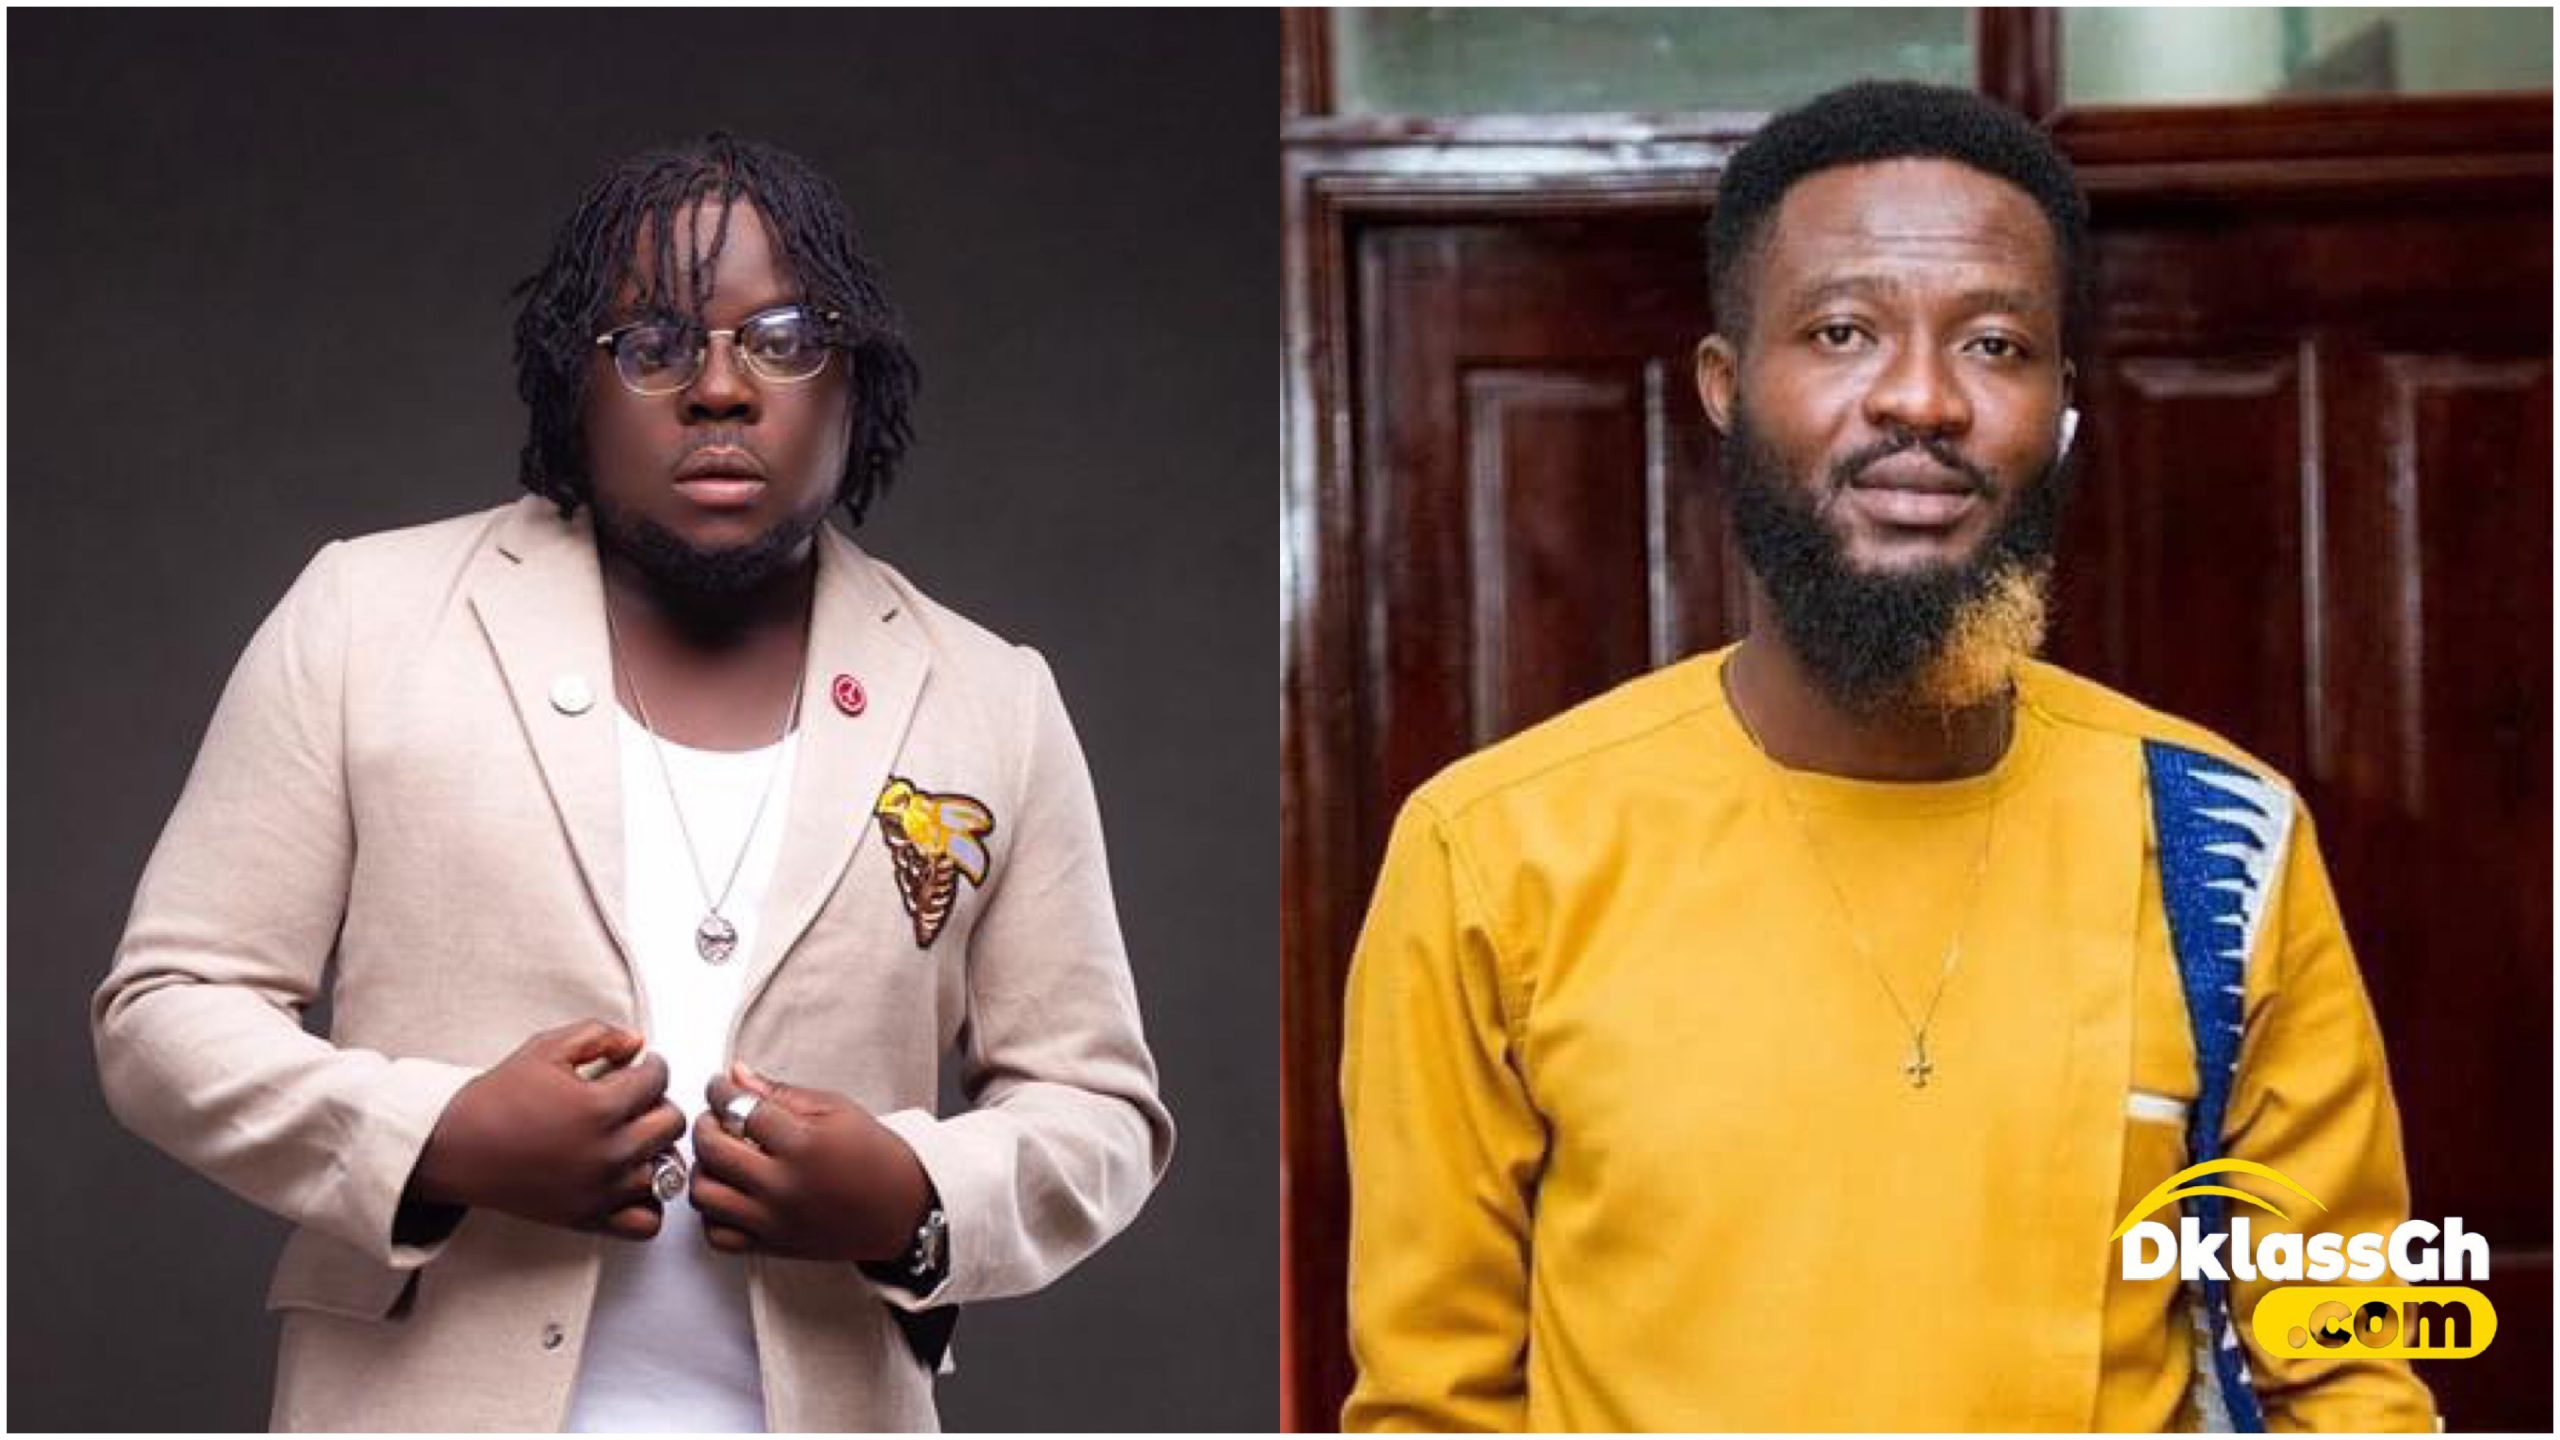 'You are Very Foolish And Empty-Headed' - Agbeshie Attacks Derrick Manny For Downplaying Edem's Appearance At The Grammys